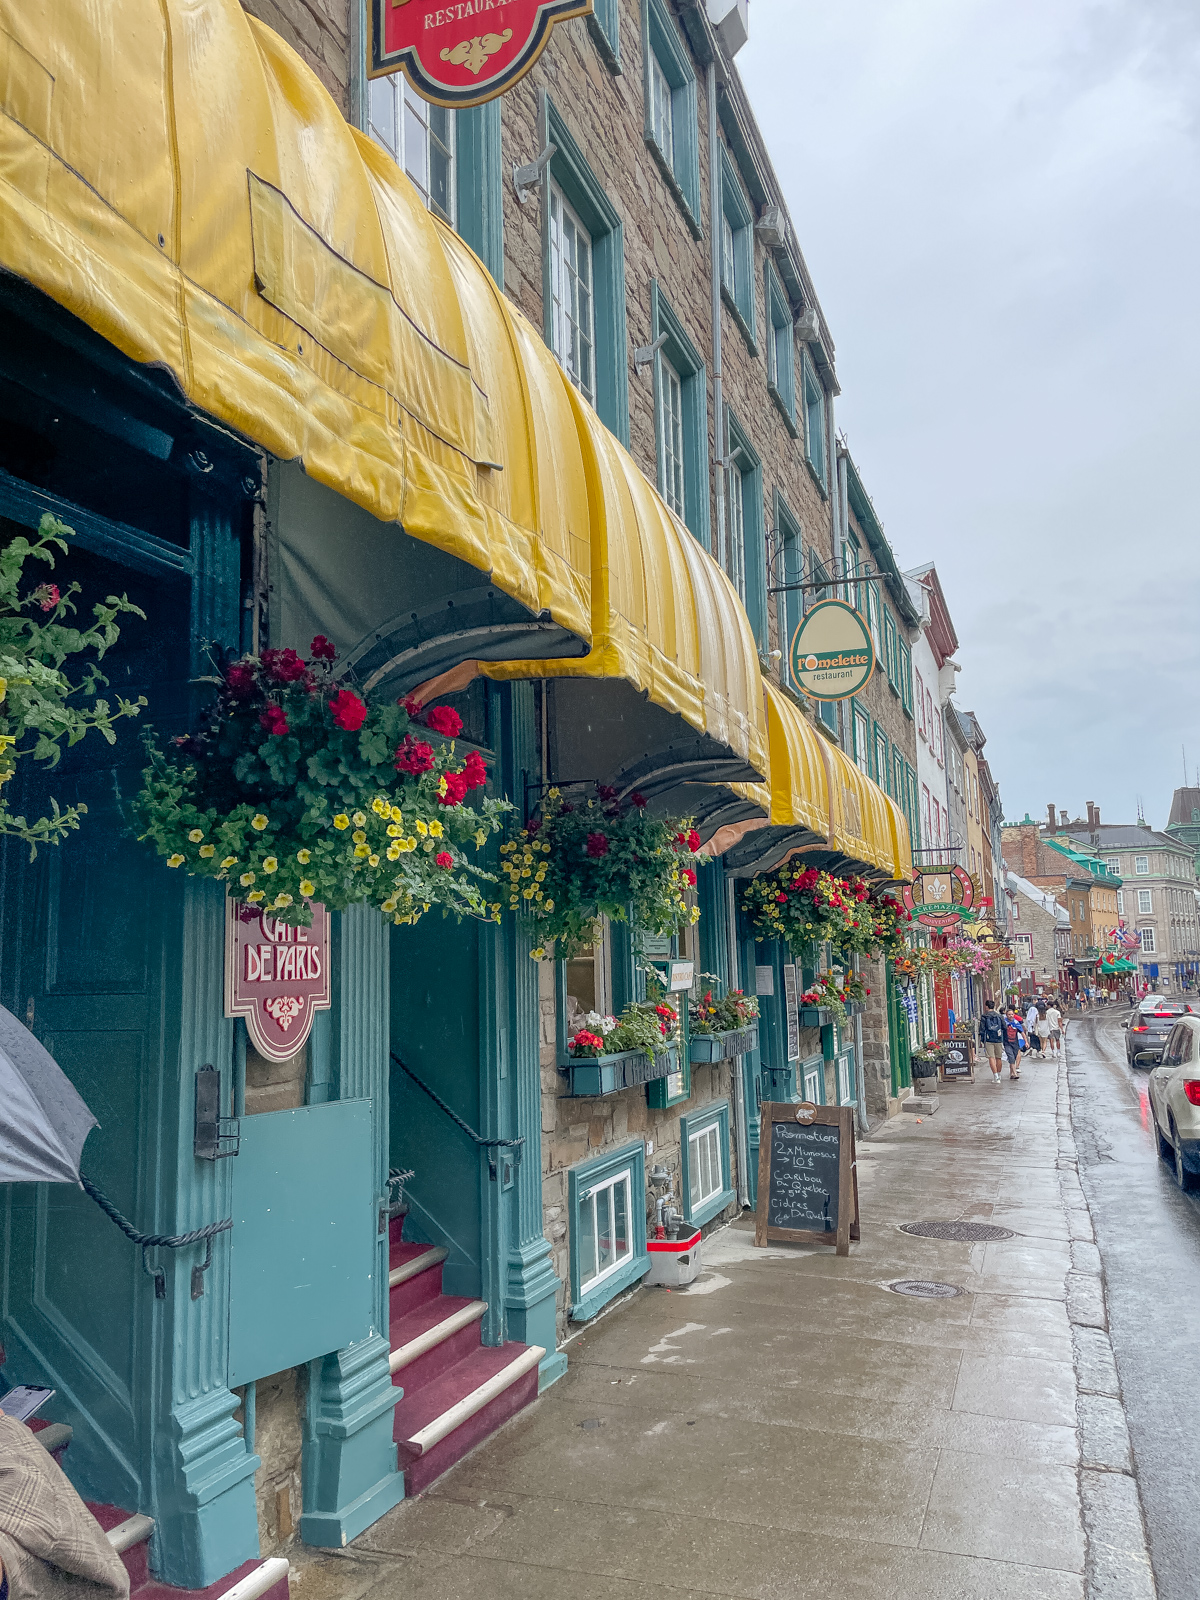 The streets of Quebec City